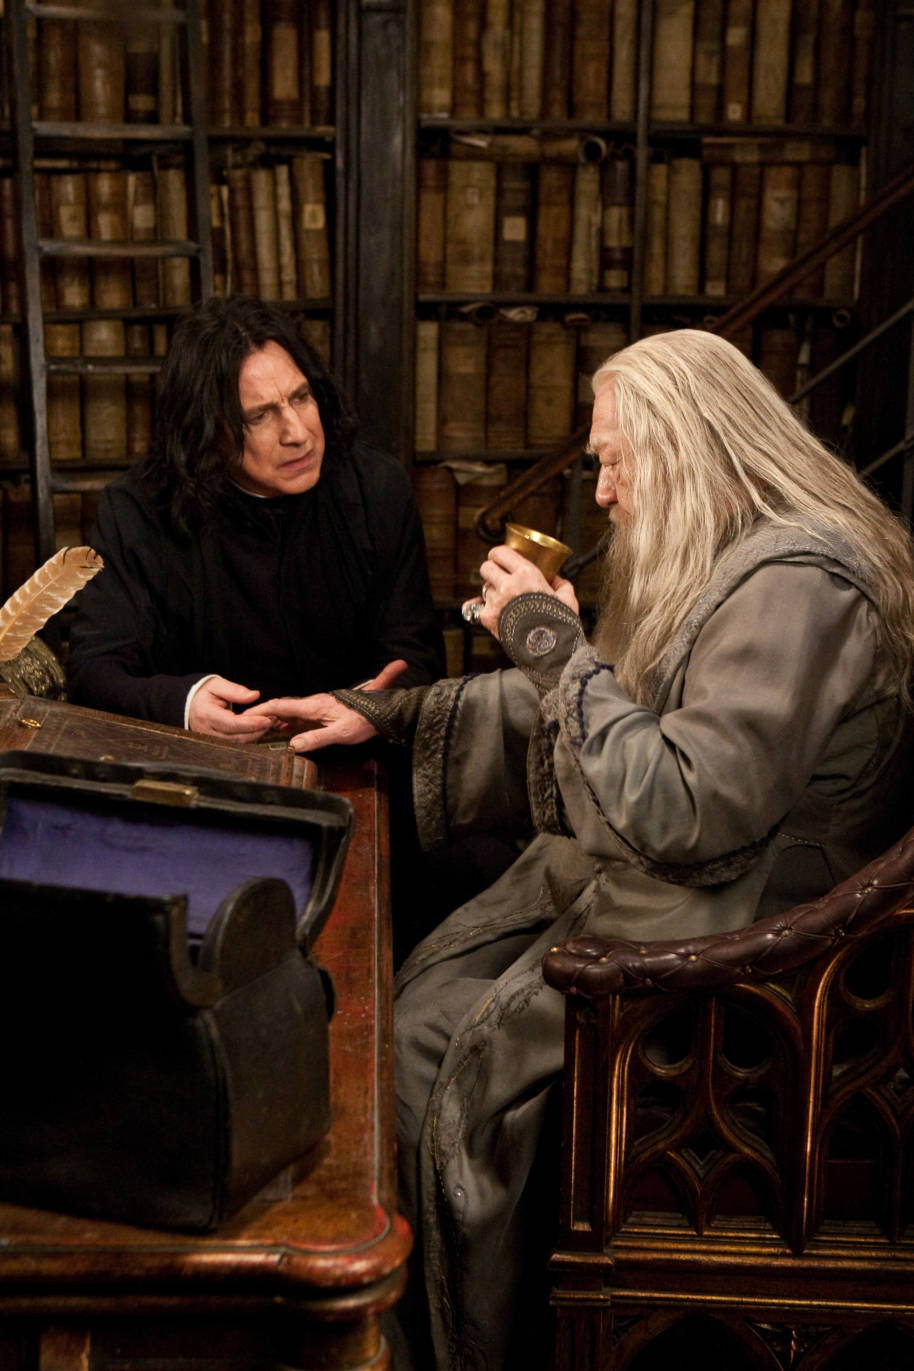 Dumbledore and Snape talking from the Deathly Hallows Part 2